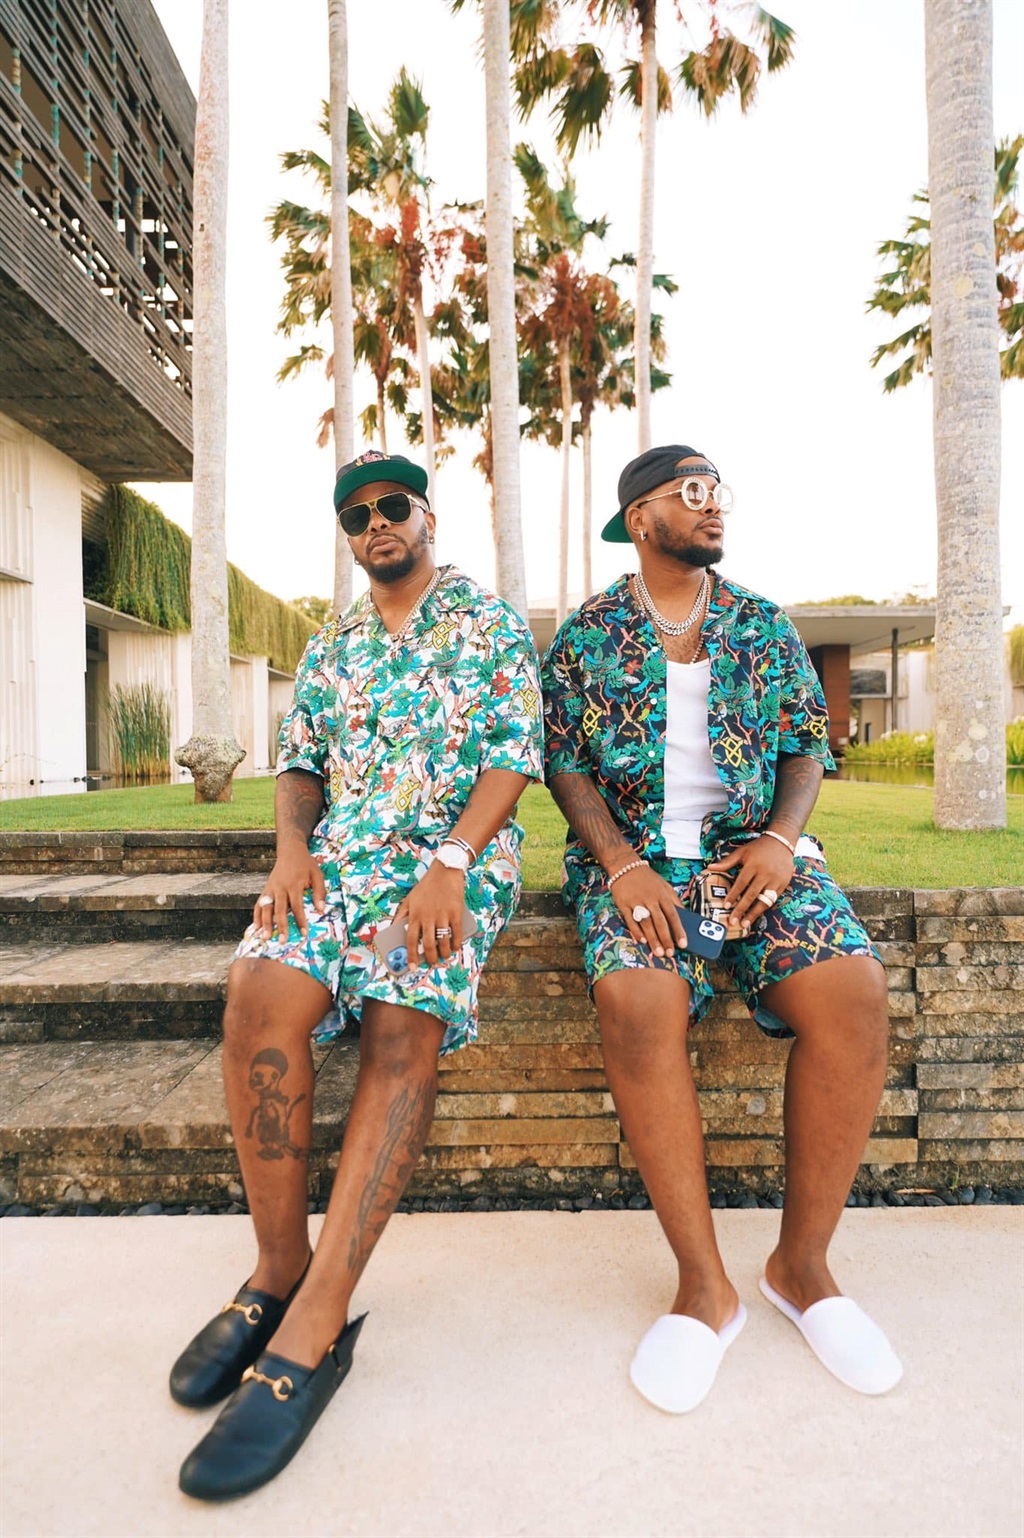 MAJOR League DJz shared an emotional message on their timeline on Monday, 23 May in remembrance of their late industry friend Rikhado Makhado, better known as Riky Rick.